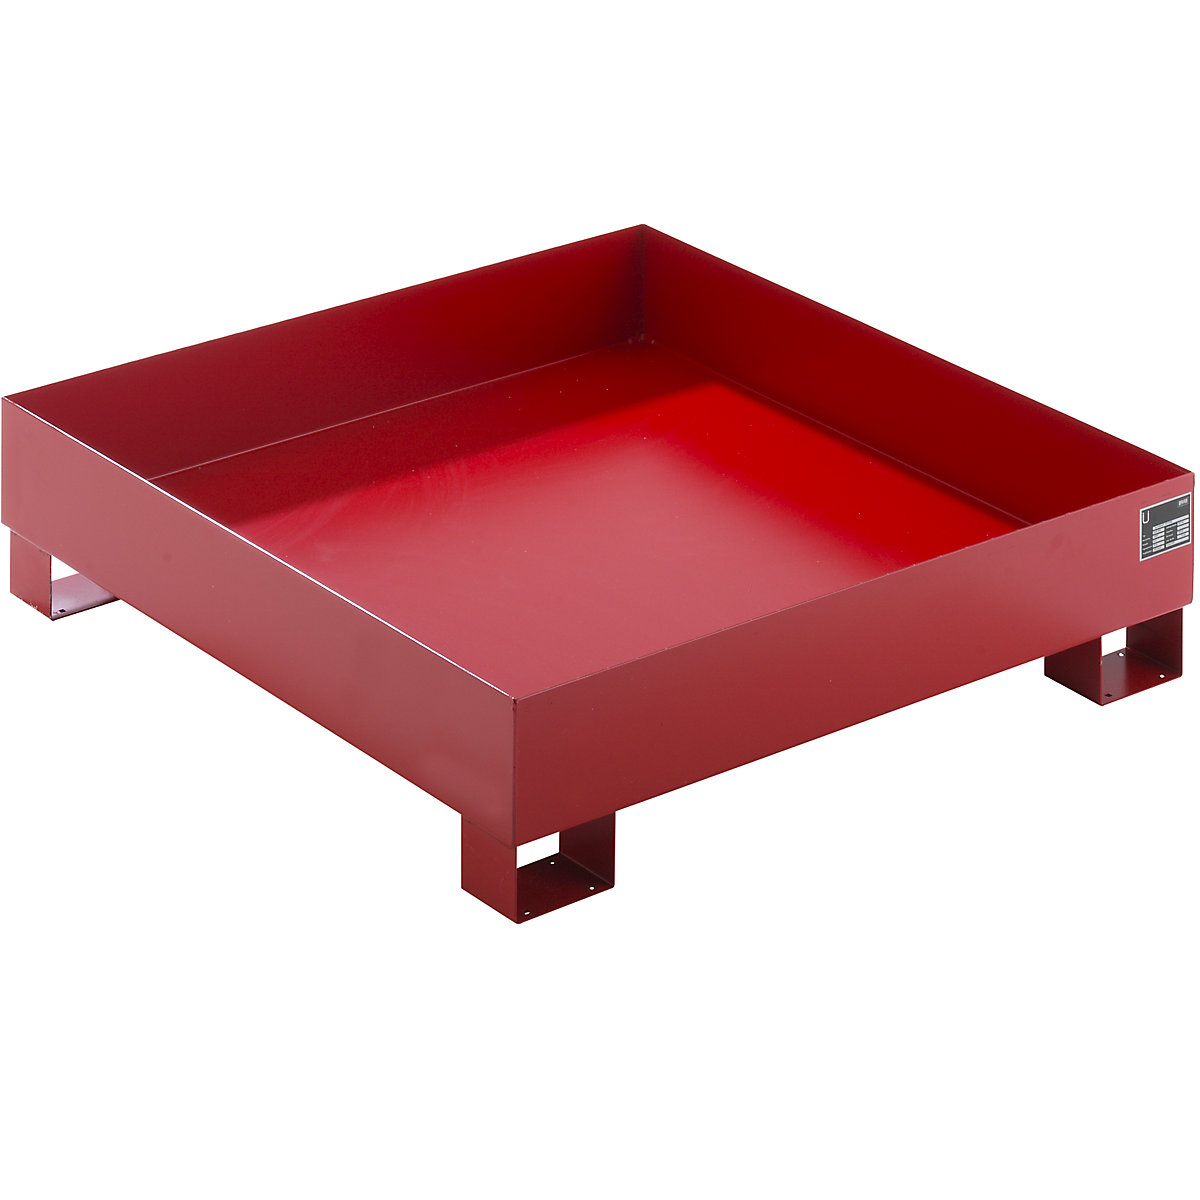 EUROKRAFTbasic – Sump tray made from sheet steel, LxWxH 1200 x 1200 x 285 mm, red RAL 3000